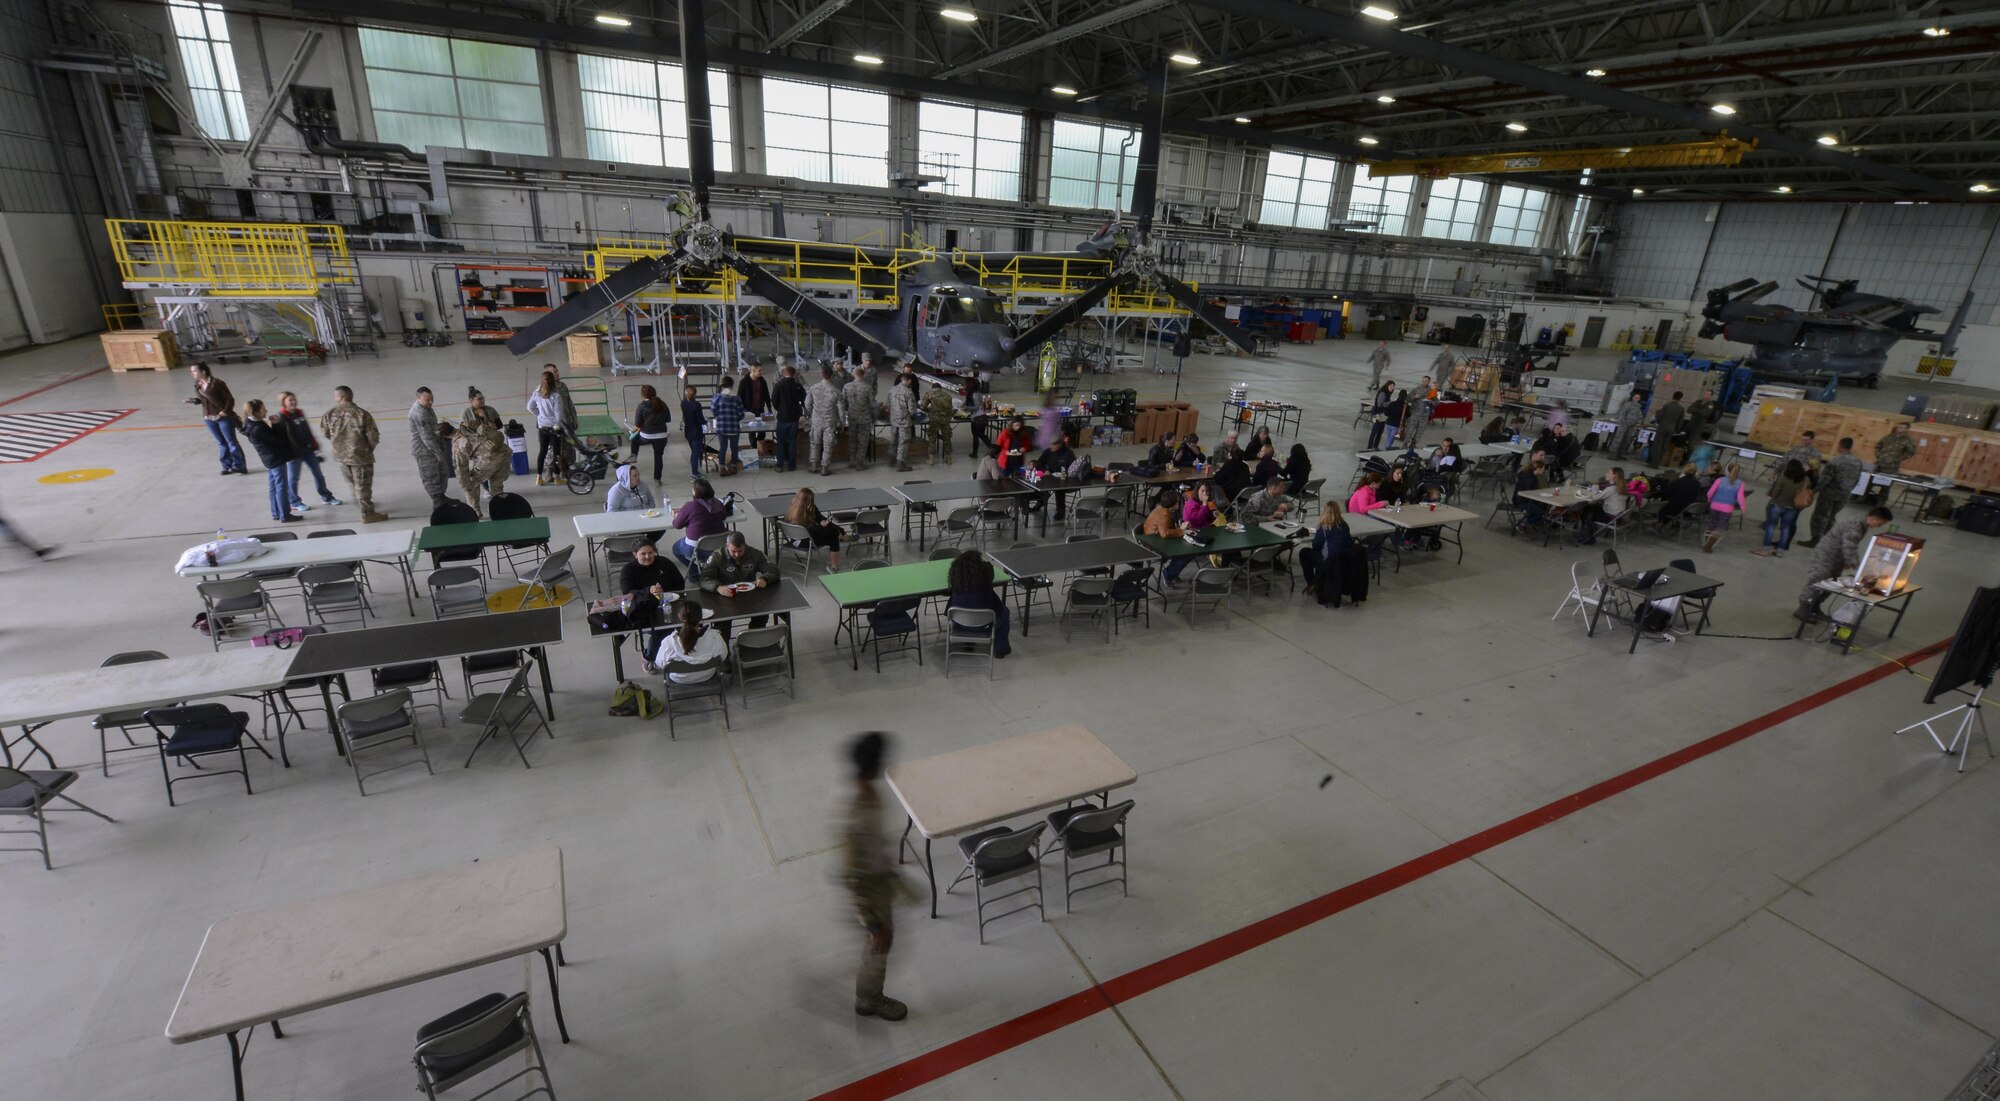 Airmen and their families enjoy lunch during the 352nd Special Operations Wing Spouses’ Day, May 26, 2016, on RAF Mildenhall, England. The event enabled participants to learn about the wing’s mission and capabilities. (U.S. Air Force photo by Staff Sgt. Micaiah Anthony/Released)